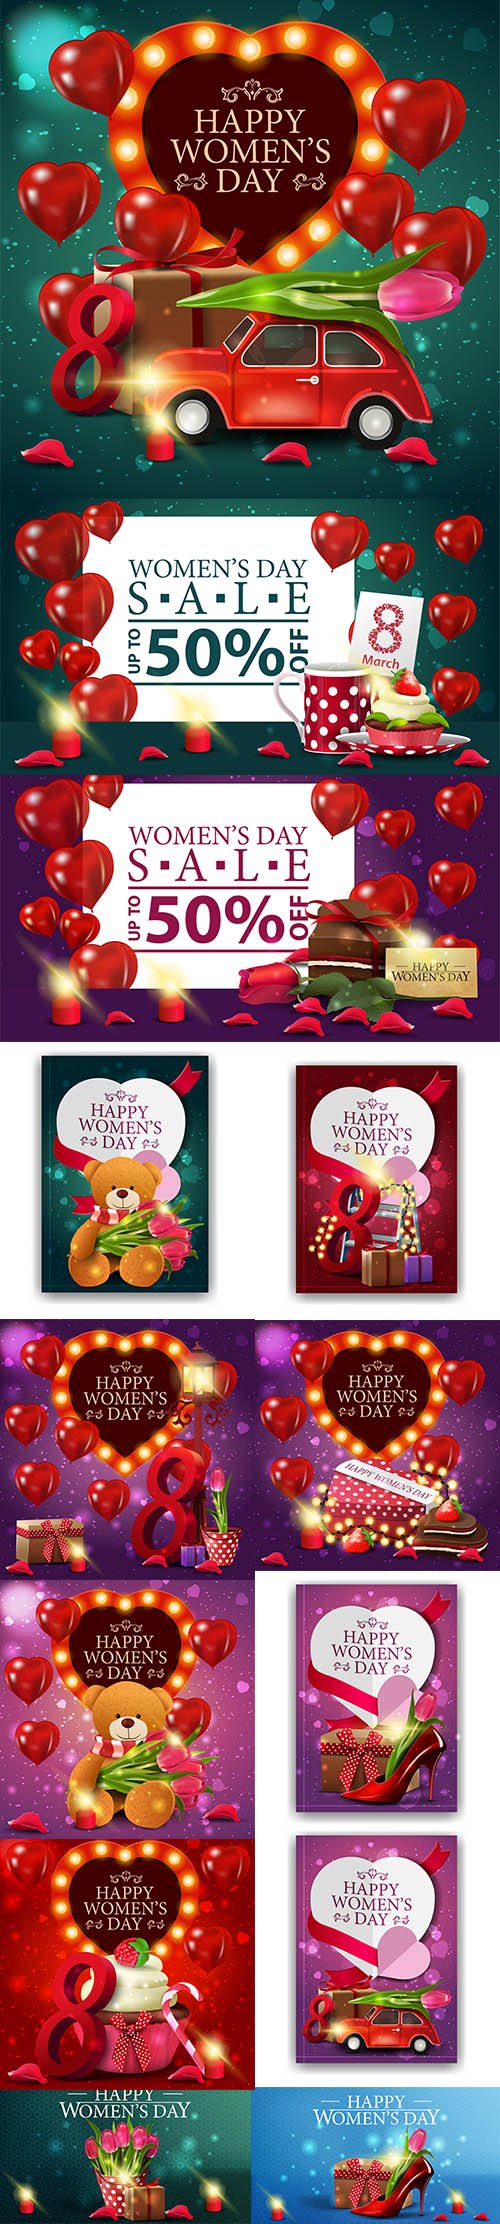 Set of Womens Day Sale Illustrations Vol 2